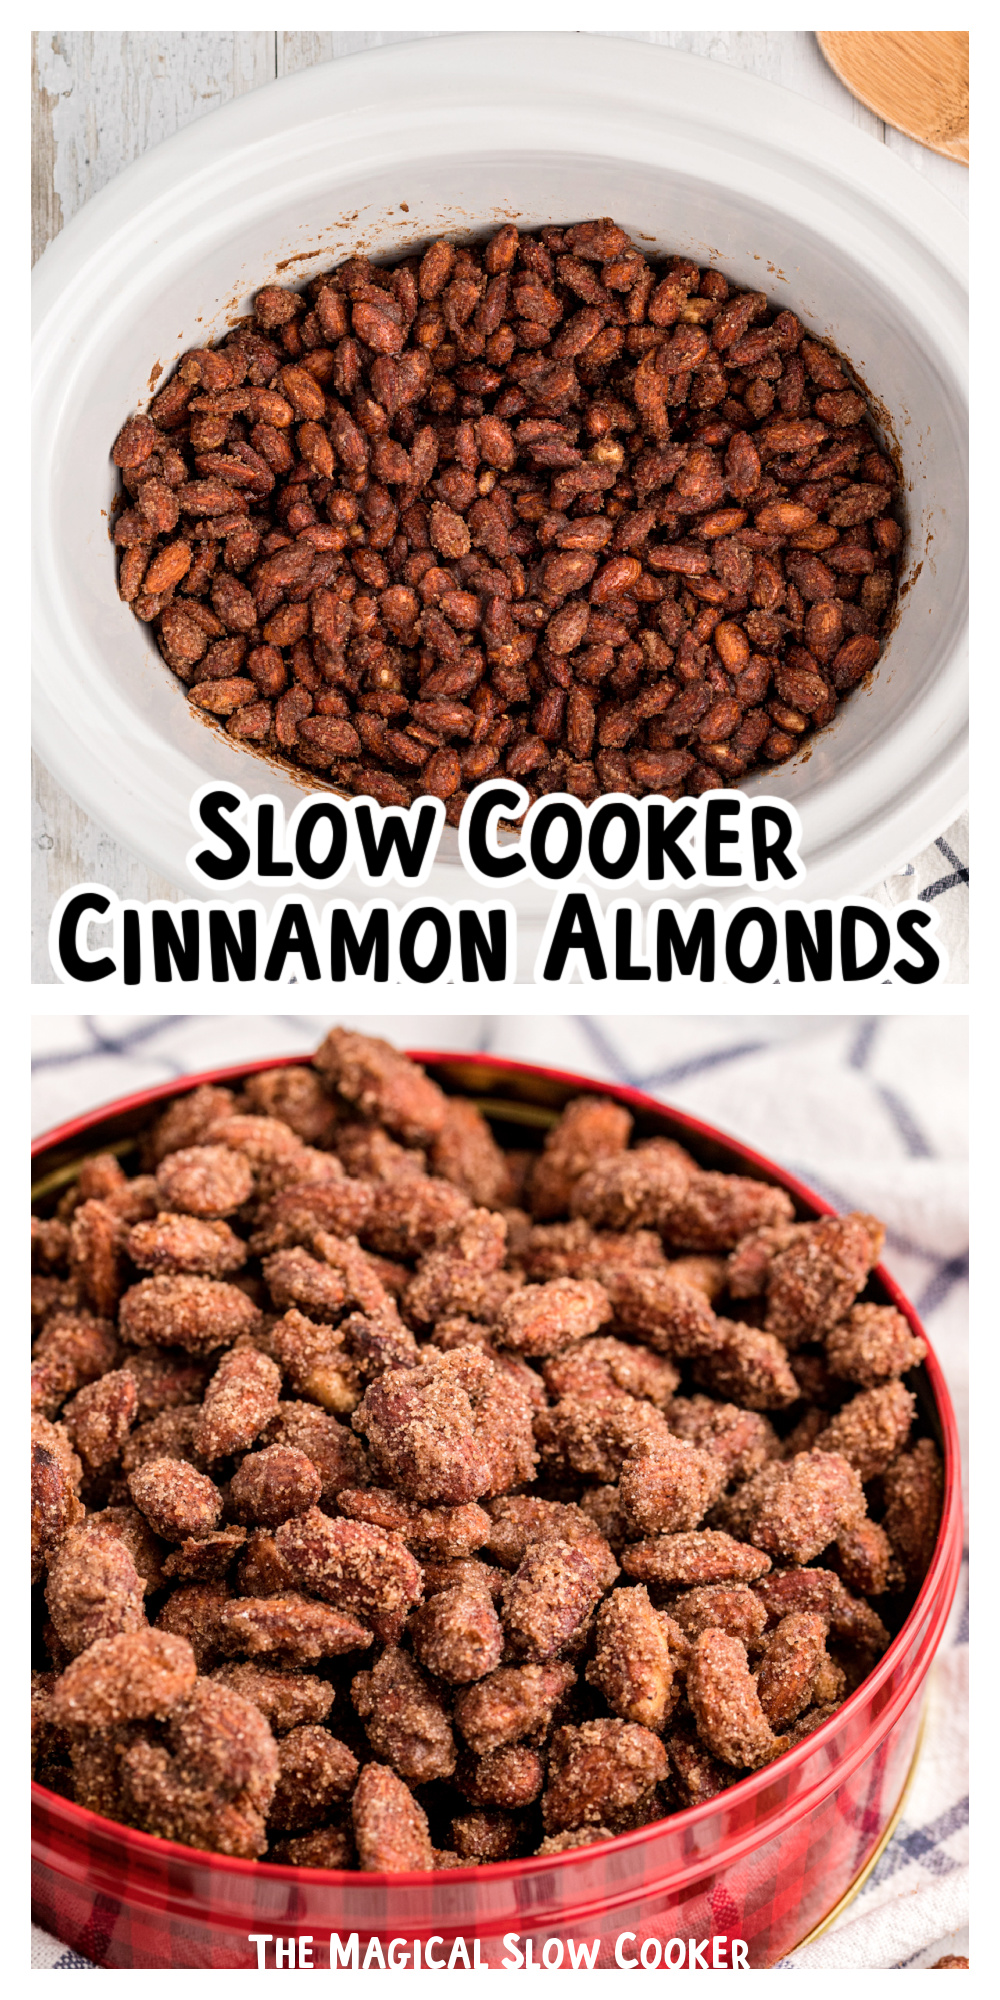 2 images of cinnamon almonds with text overlay.